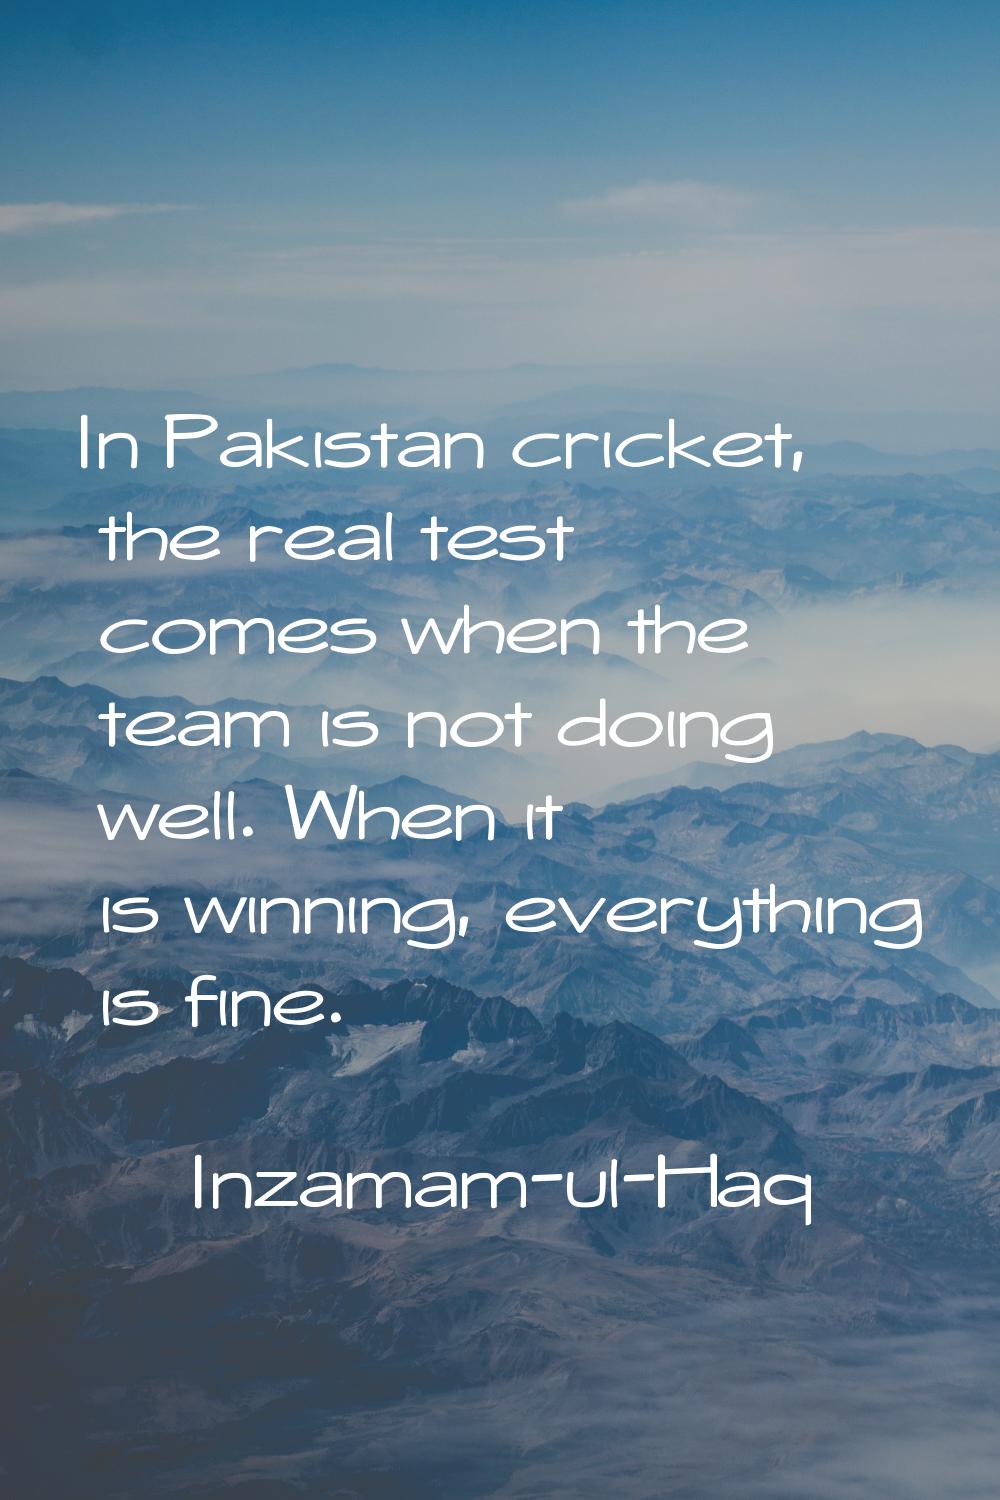 In Pakistan cricket, the real test comes when the team is not doing well. When it is winning, every